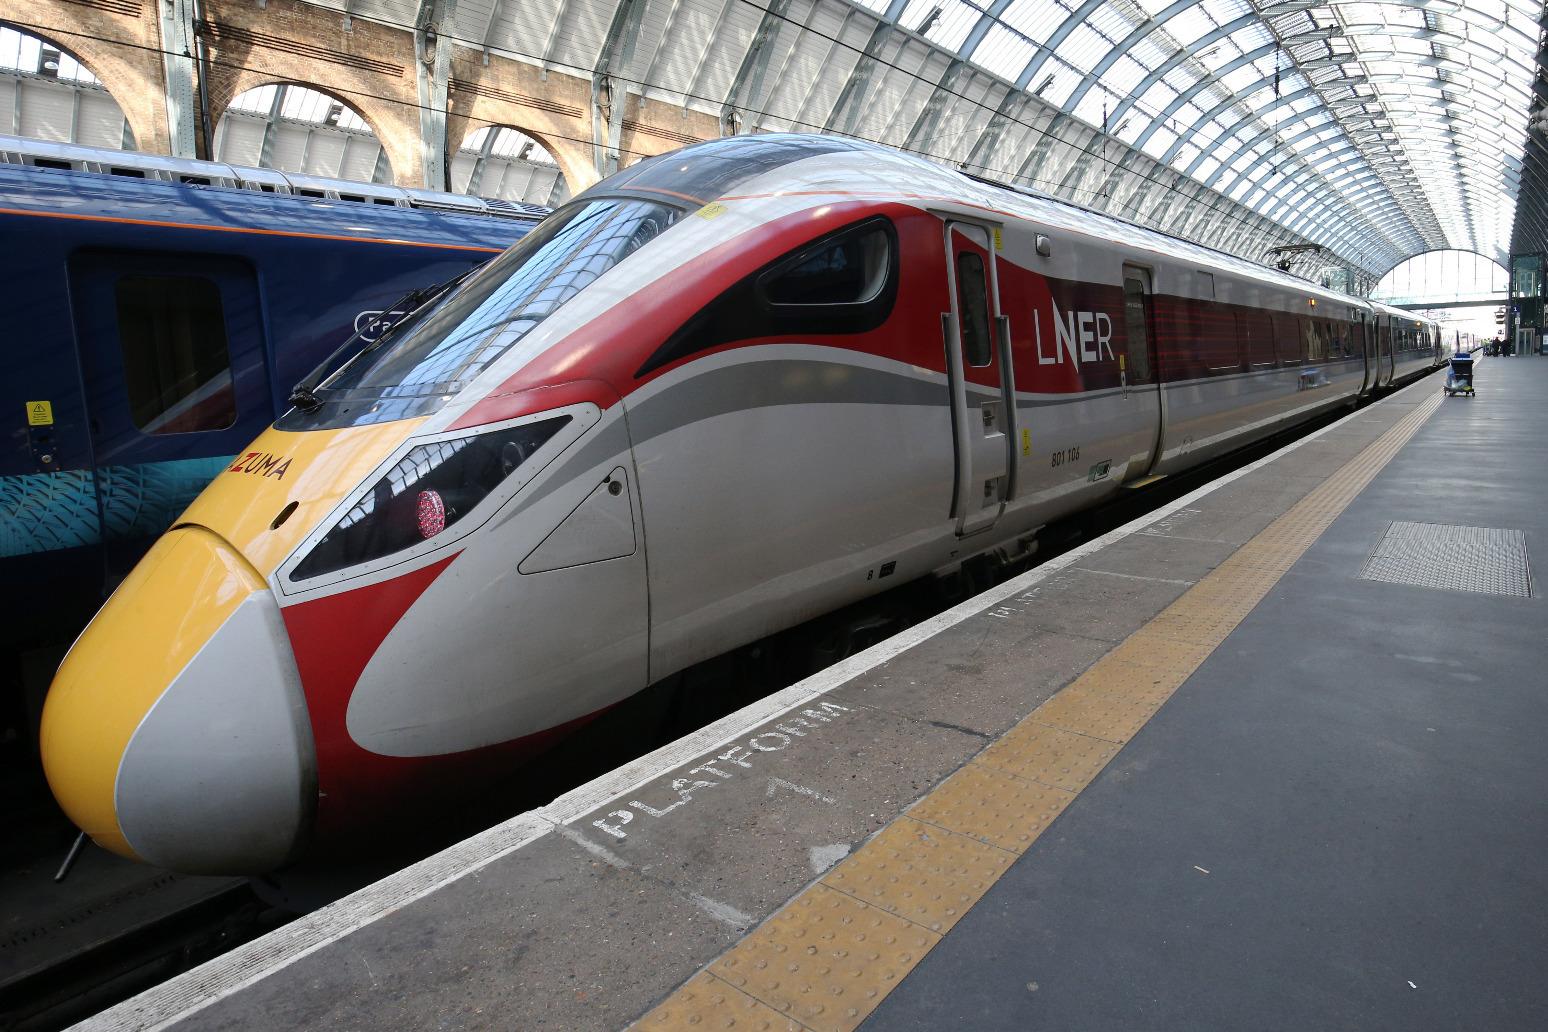 Rail strike negotiations in ‘hiatus’ after rejection of latest offer 